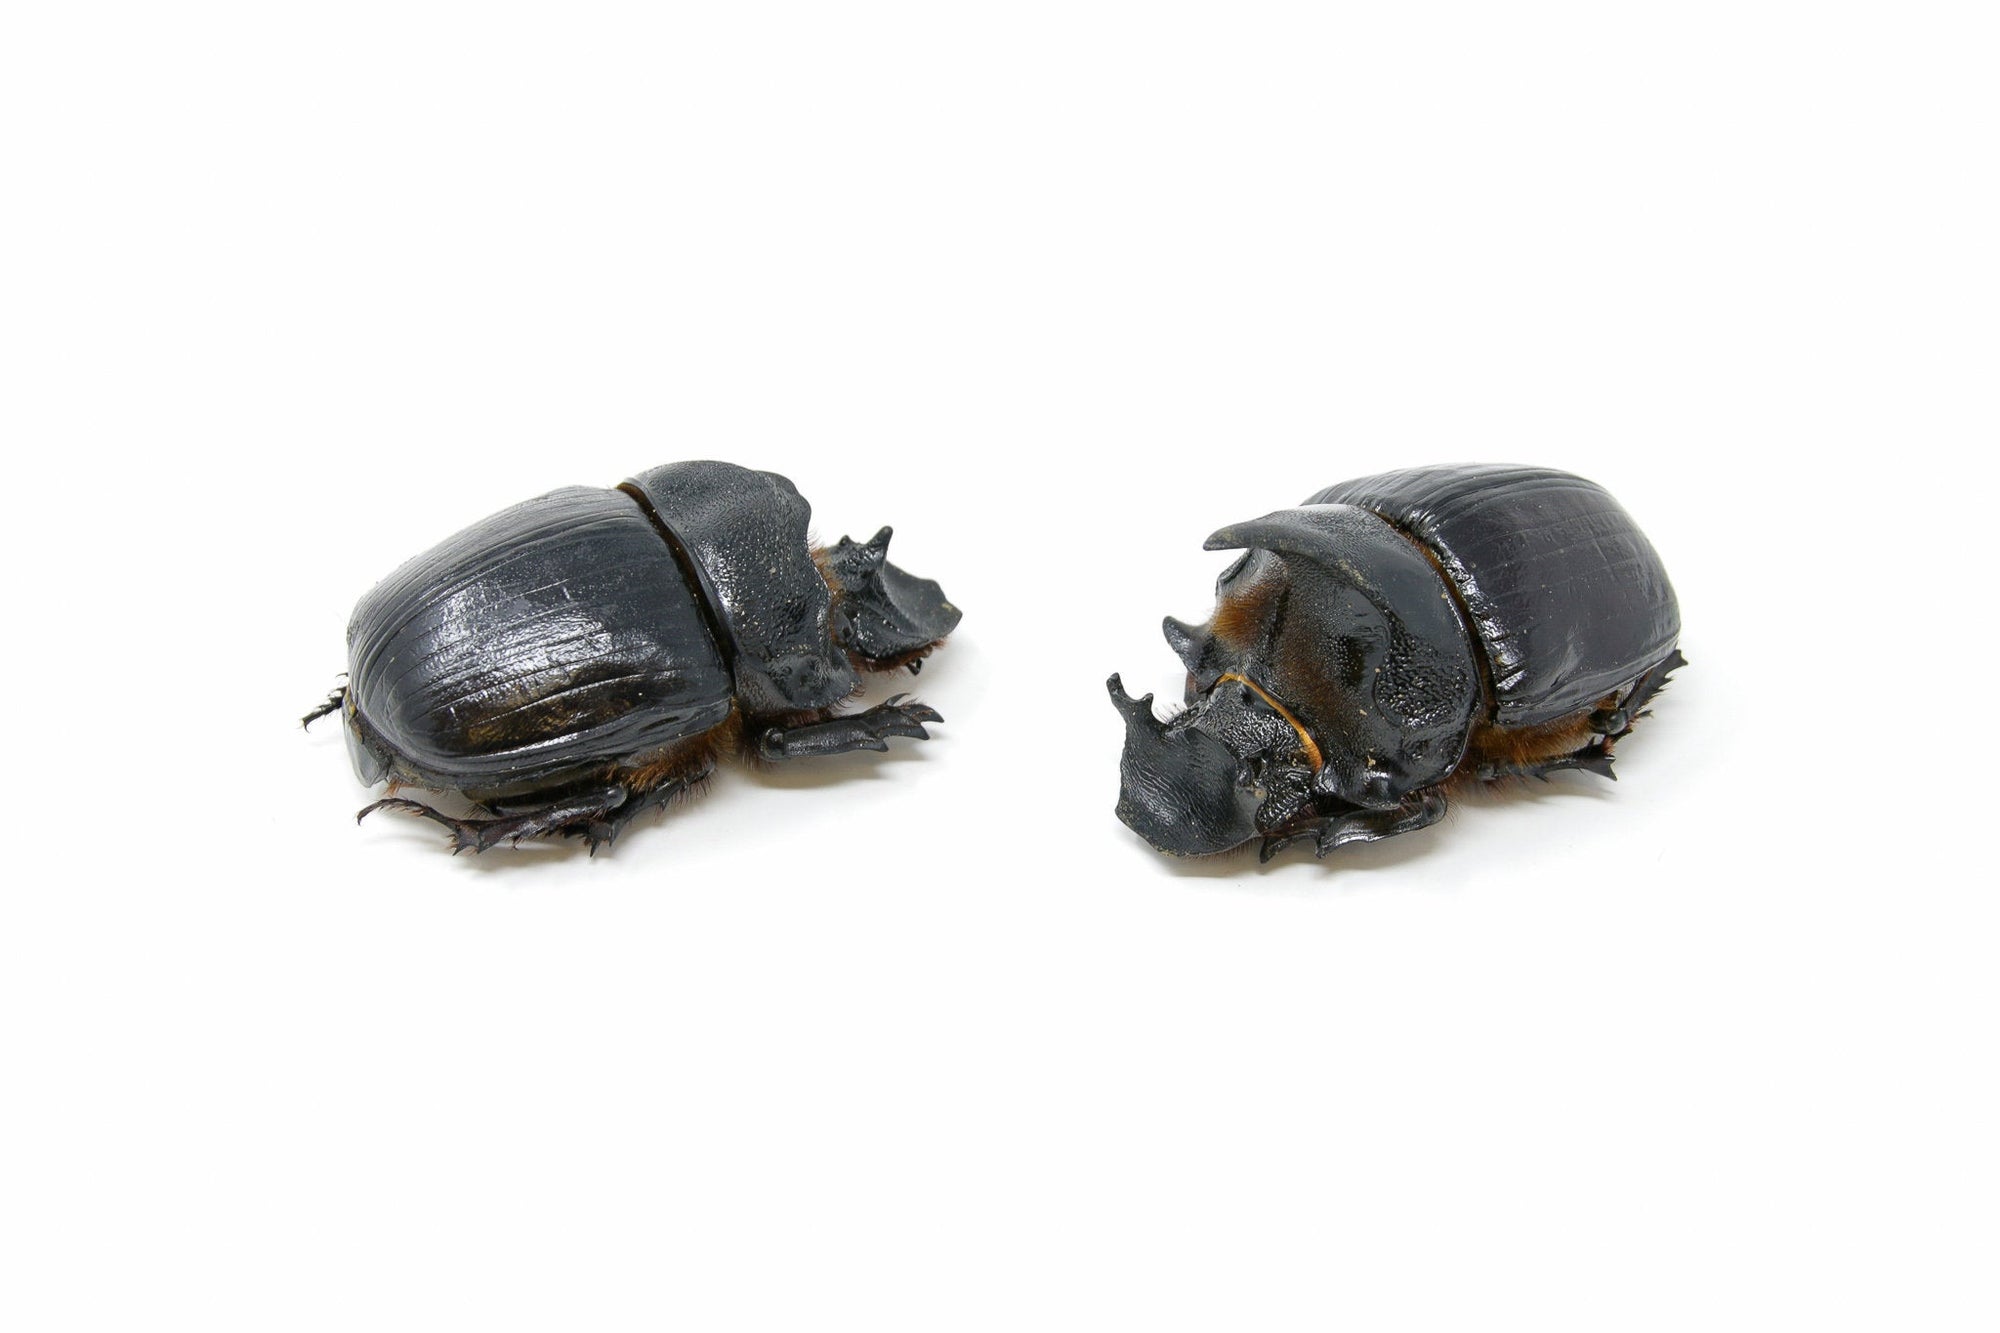 Pair of Giant Elephant Dung Beetles (2) | Heliocopris dominus A1, Thailand | Entomology Specimens, SCARABS